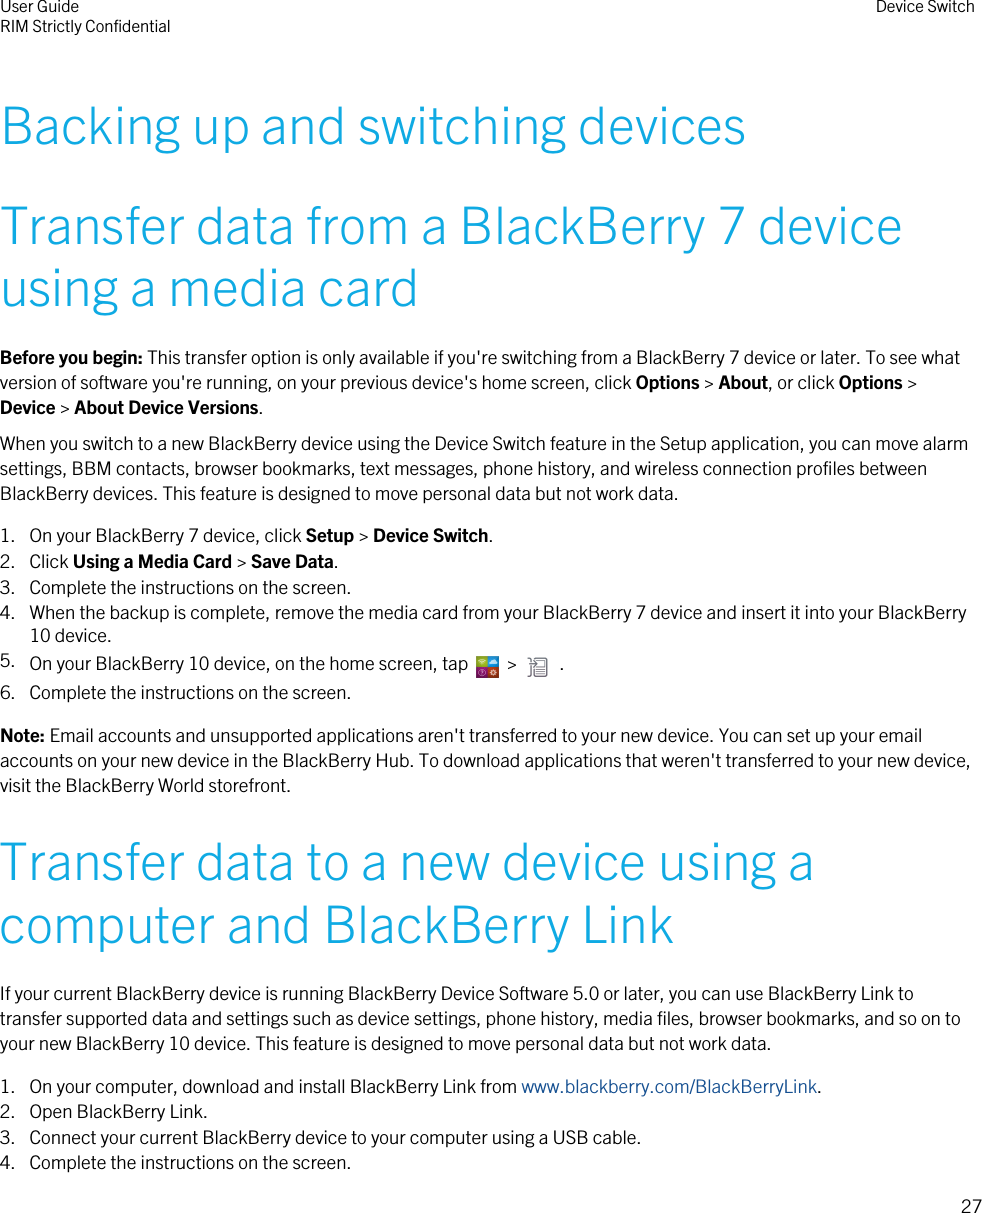 Backing up and switching devicesTransfer data from a BlackBerry 7 deviceusing a media cardBefore you begin: This transfer option is only available if you&apos;re switching from a BlackBerry 7 device or later. To see whatversion of software you&apos;re running, on your previous device&apos;s home screen, click Options &gt; About, or click Options &gt;Device &gt; About Device Versions.When you switch to a new BlackBerry device using the Device Switch feature in the Setup application, you can move alarmsettings, BBM contacts, browser bookmarks, text messages, phone history, and wireless connection profiles betweenBlackBerry devices. This feature is designed to move personal data but not work data.1. On your BlackBerry 7 device, click Setup &gt; Device Switch.2. Click Using a Media Card &gt; Save Data.3. Complete the instructions on the screen.4. When the backup is complete, remove the media card from your BlackBerry 7 device and insert it into your BlackBerry10 device.5. On your BlackBerry 10 device, on the home screen, tap    &gt;    .6. Complete the instructions on the screen.Note: Email accounts and unsupported applications aren&apos;t transferred to your new device. You can set up your emailaccounts on your new device in the BlackBerry Hub. To download applications that weren&apos;t transferred to your new device,visit the BlackBerry World storefront.Transfer data to a new device using acomputer and BlackBerry LinkIf your current BlackBerry device is running BlackBerry Device Software 5.0 or later, you can use BlackBerry Link totransfer supported data and settings such as device settings, phone history, media files, browser bookmarks, and so on toyour new BlackBerry 10 device. This feature is designed to move personal data but not work data.1. On your computer, download and install BlackBerry Link from www.blackberry.com/BlackBerryLink.2. Open BlackBerry Link.3. Connect your current BlackBerry device to your computer using a USB cable.4. Complete the instructions on the screen.User GuideRIM Strictly Confidential Device Switch27